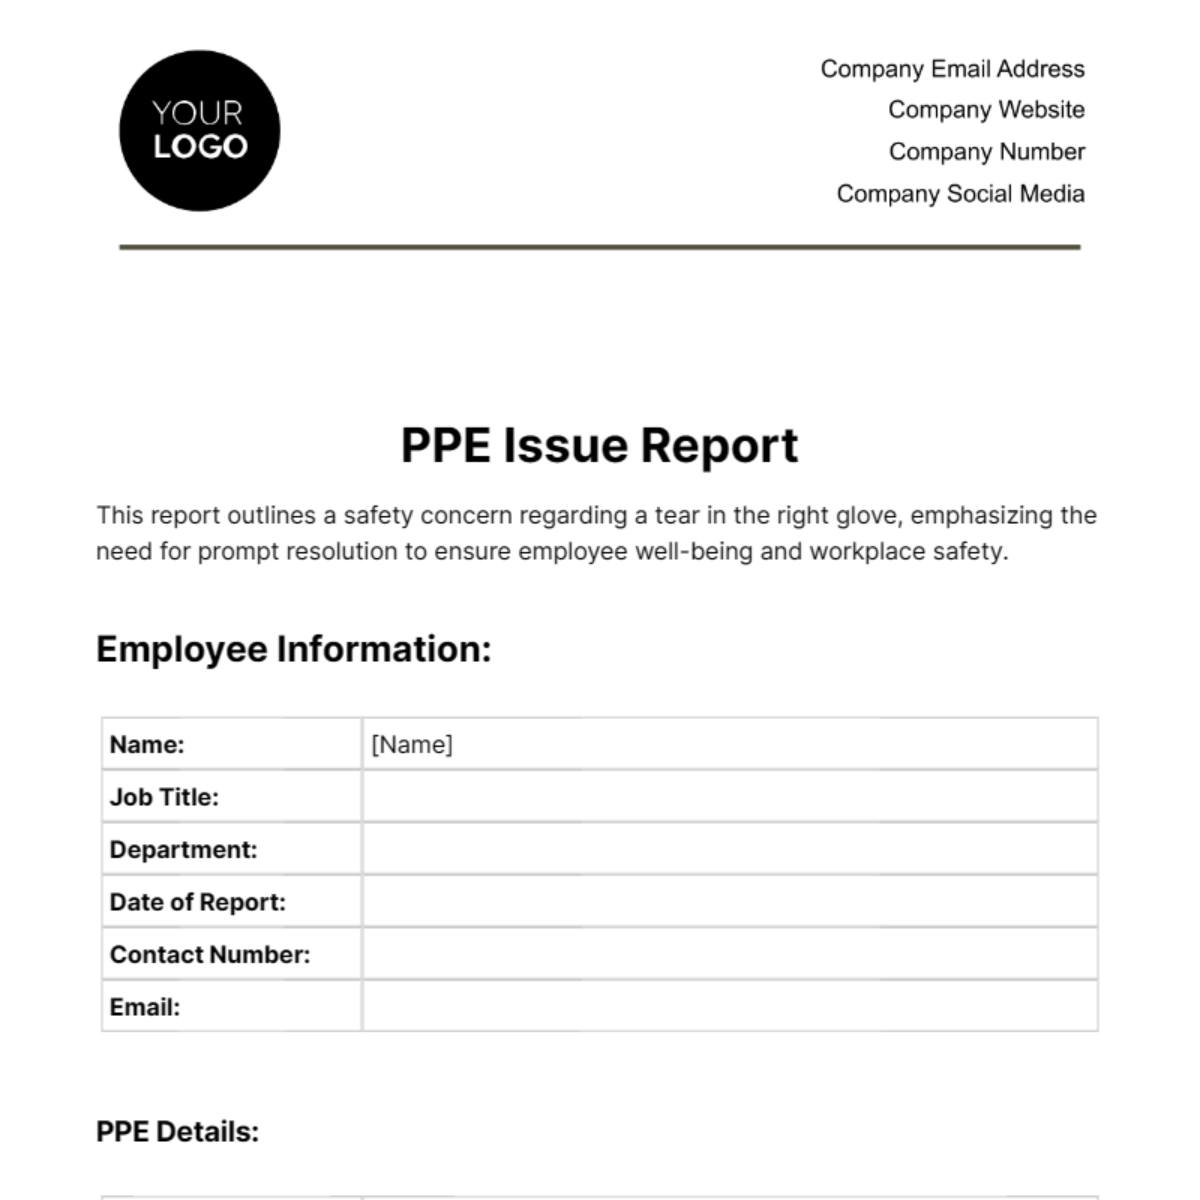 PPE Issue Report Template